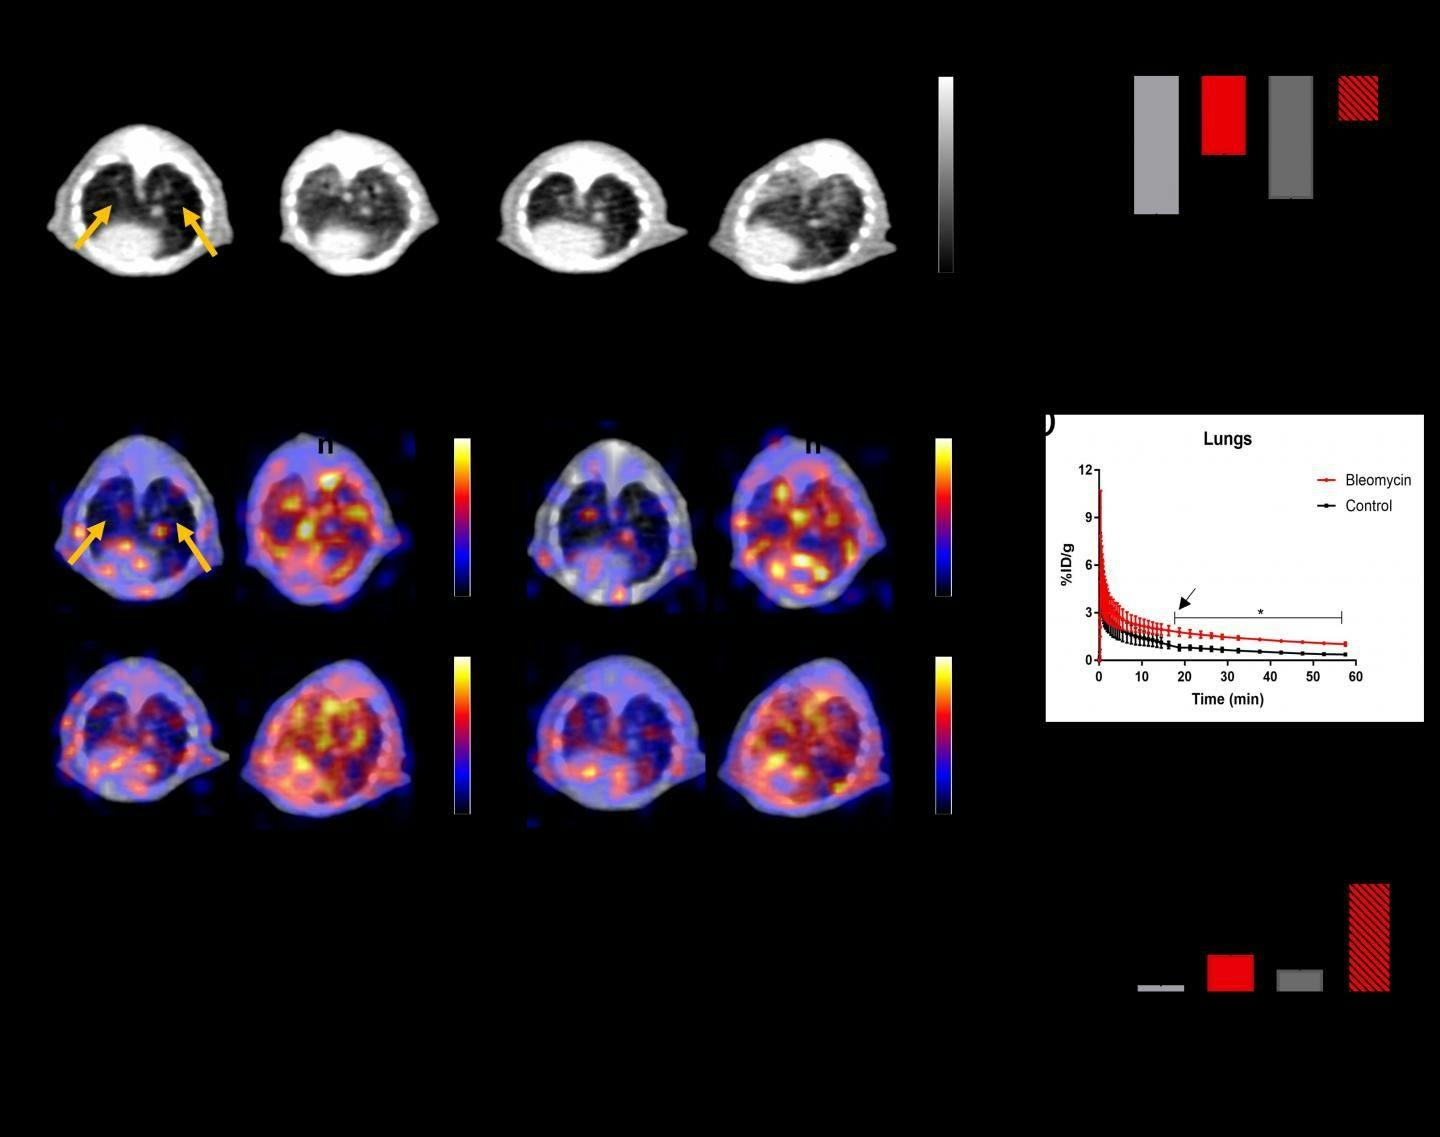 A) Axial CT images through the mouse lungs at 7 and 14 days after intratracheal administration of bleomycin or saline (as a control), demonstrating increased lung fibrosis in the bleomycin group (white arrows). (B) CT attenuation histograms in Hounsfield units (HU) after lung segmentation demonstrate increased attenuation in the lungs in the bleomycin group than the control group (p <0.05), consistent with increasing fibrosis (n=3). (C) Representative axial PET/CT fusion images at 20 and 60 min demonstrating increased FAPI uptake in the lungs of the bleomycin group (white arrows) with no significant uptake in the control group (yellow arrows). (D) Time-activity curve of lung uptake ROI analysis demonstrating higher FAPI uptake in the lungs of the bleomycin group than the control (p < 0.05), 14 days after bleomycin (n=3). (E) Ex vivo biodistribution data of lung tissue demonstrating higher radiotracer uptake in the lungs of the bleomycin group than the control (n=3). *p<0.05, **p<0.01.

Credit: Image created by CA Ferreira et al., University of Wisconsin-Madison, Madison, WI.


